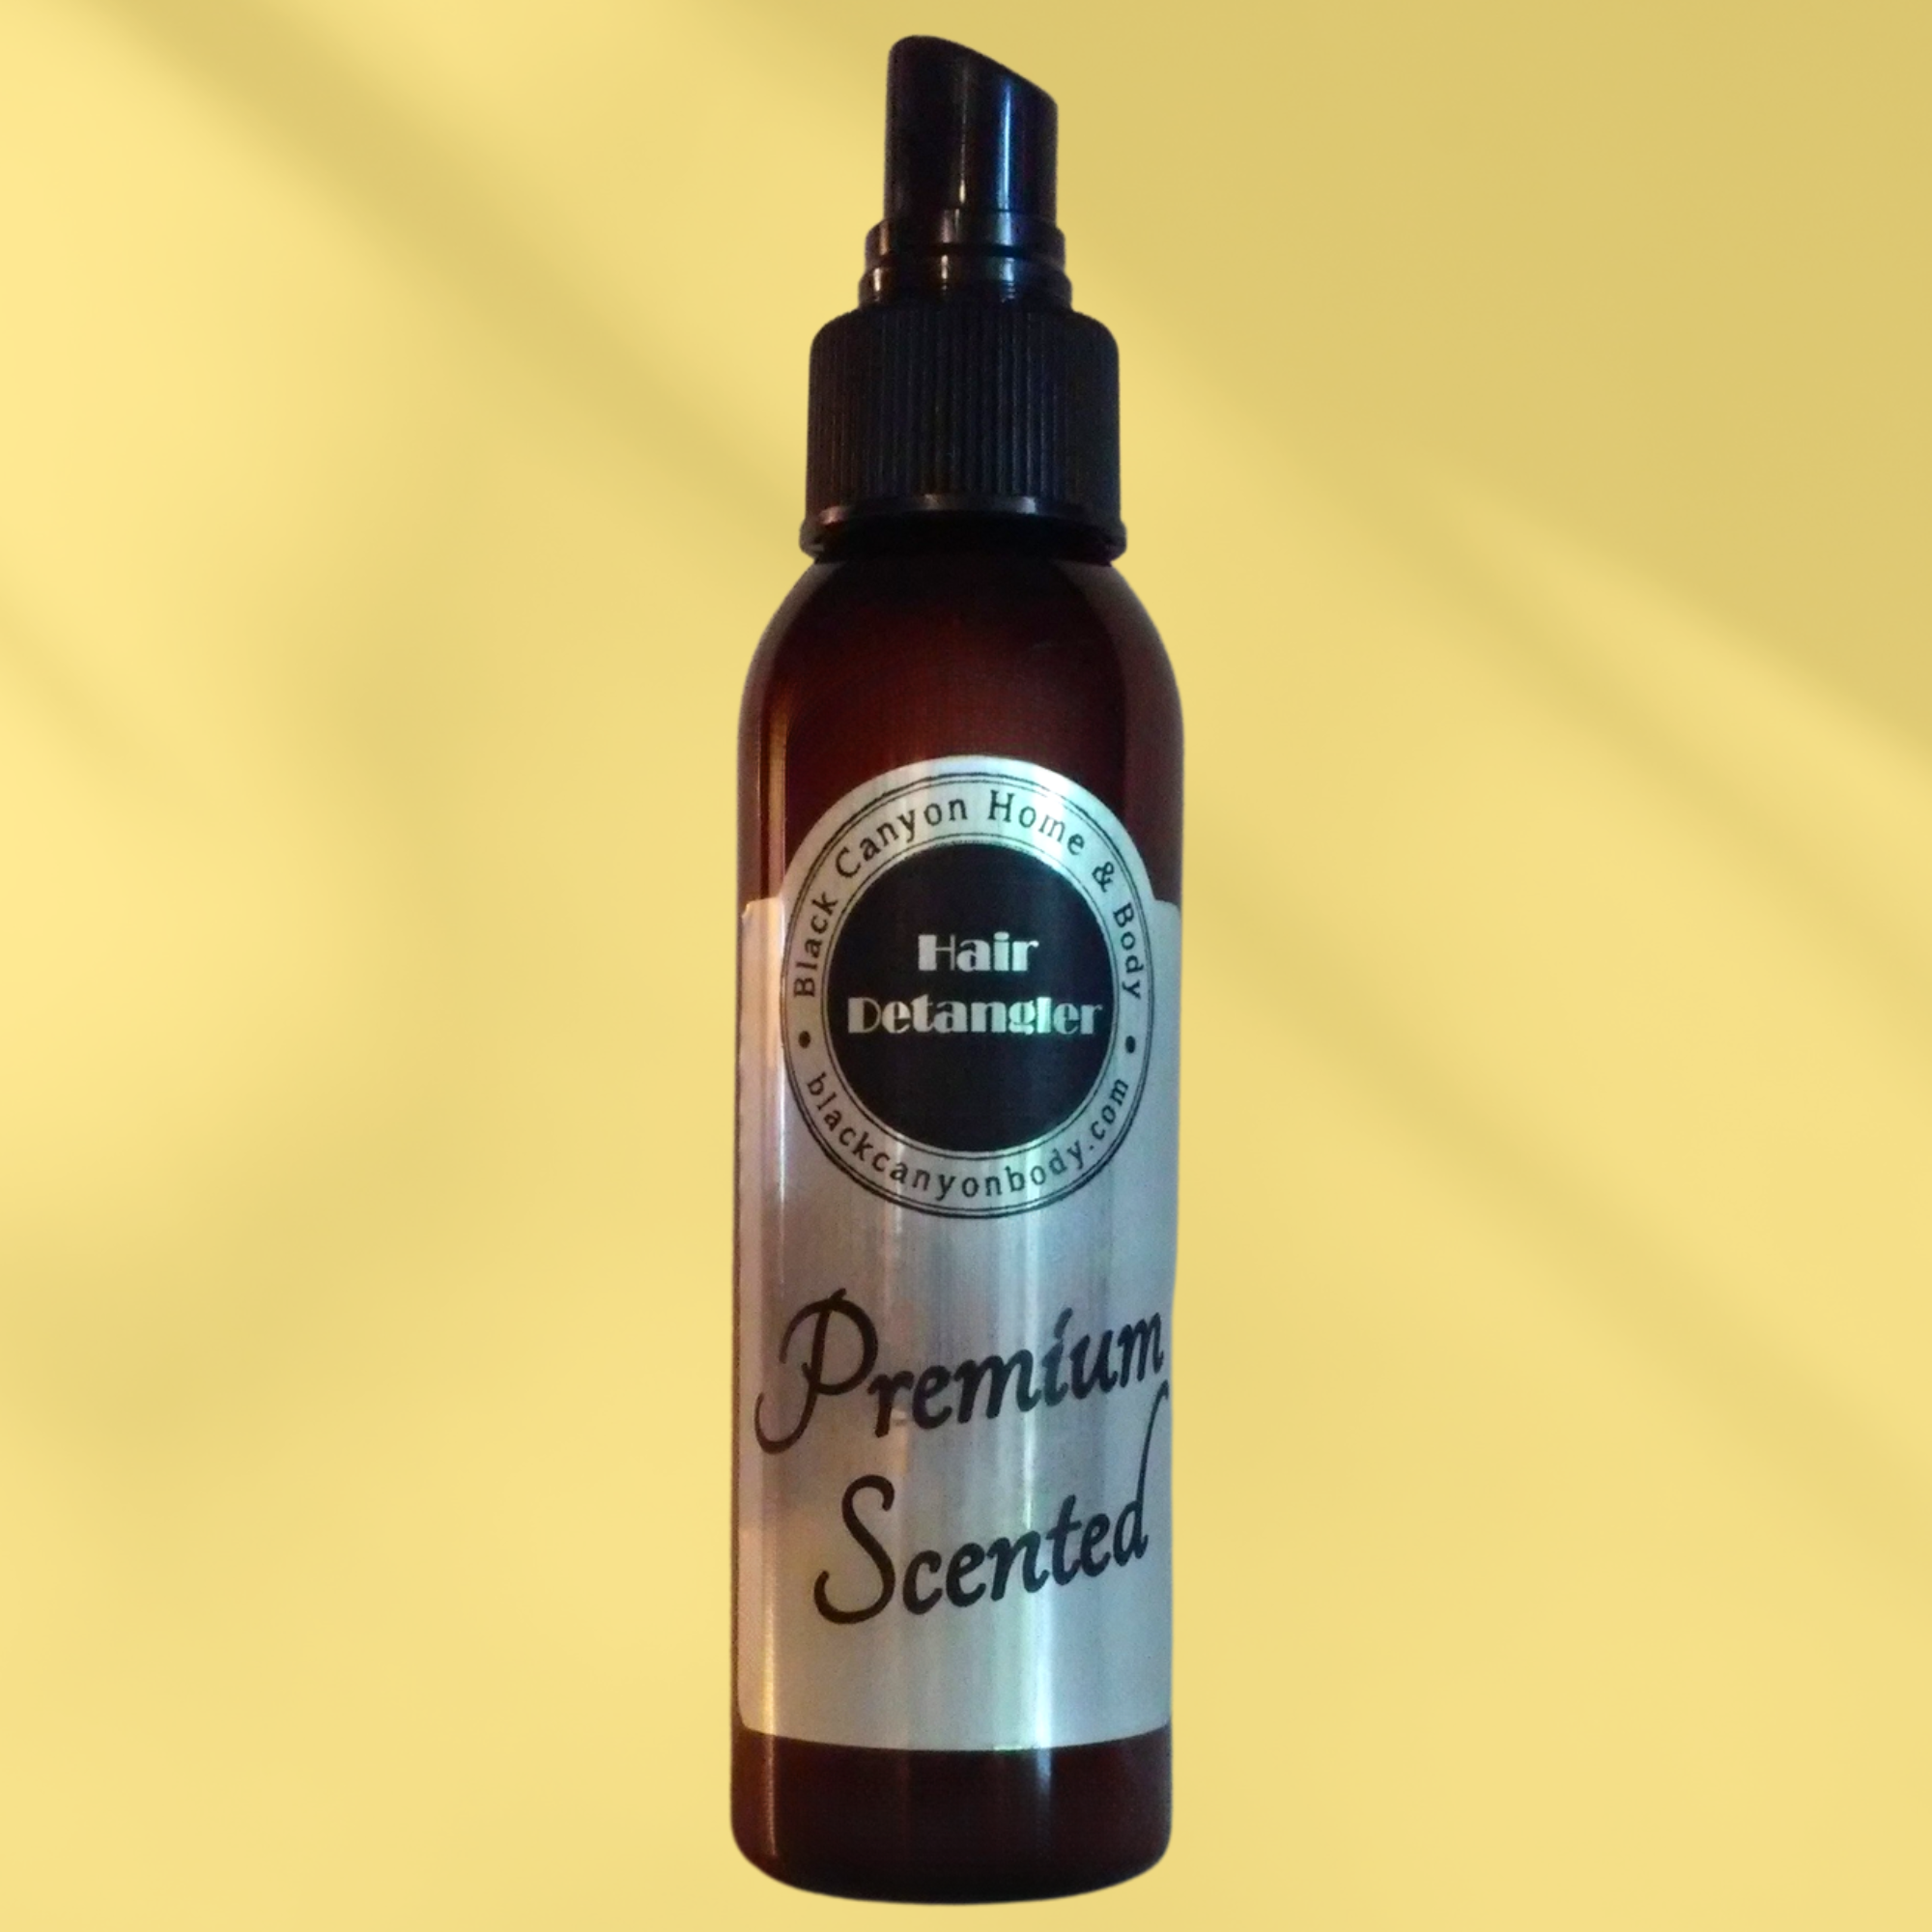 Black Canyon Hookah Scented Hair Detangler Spray with Olive Oil